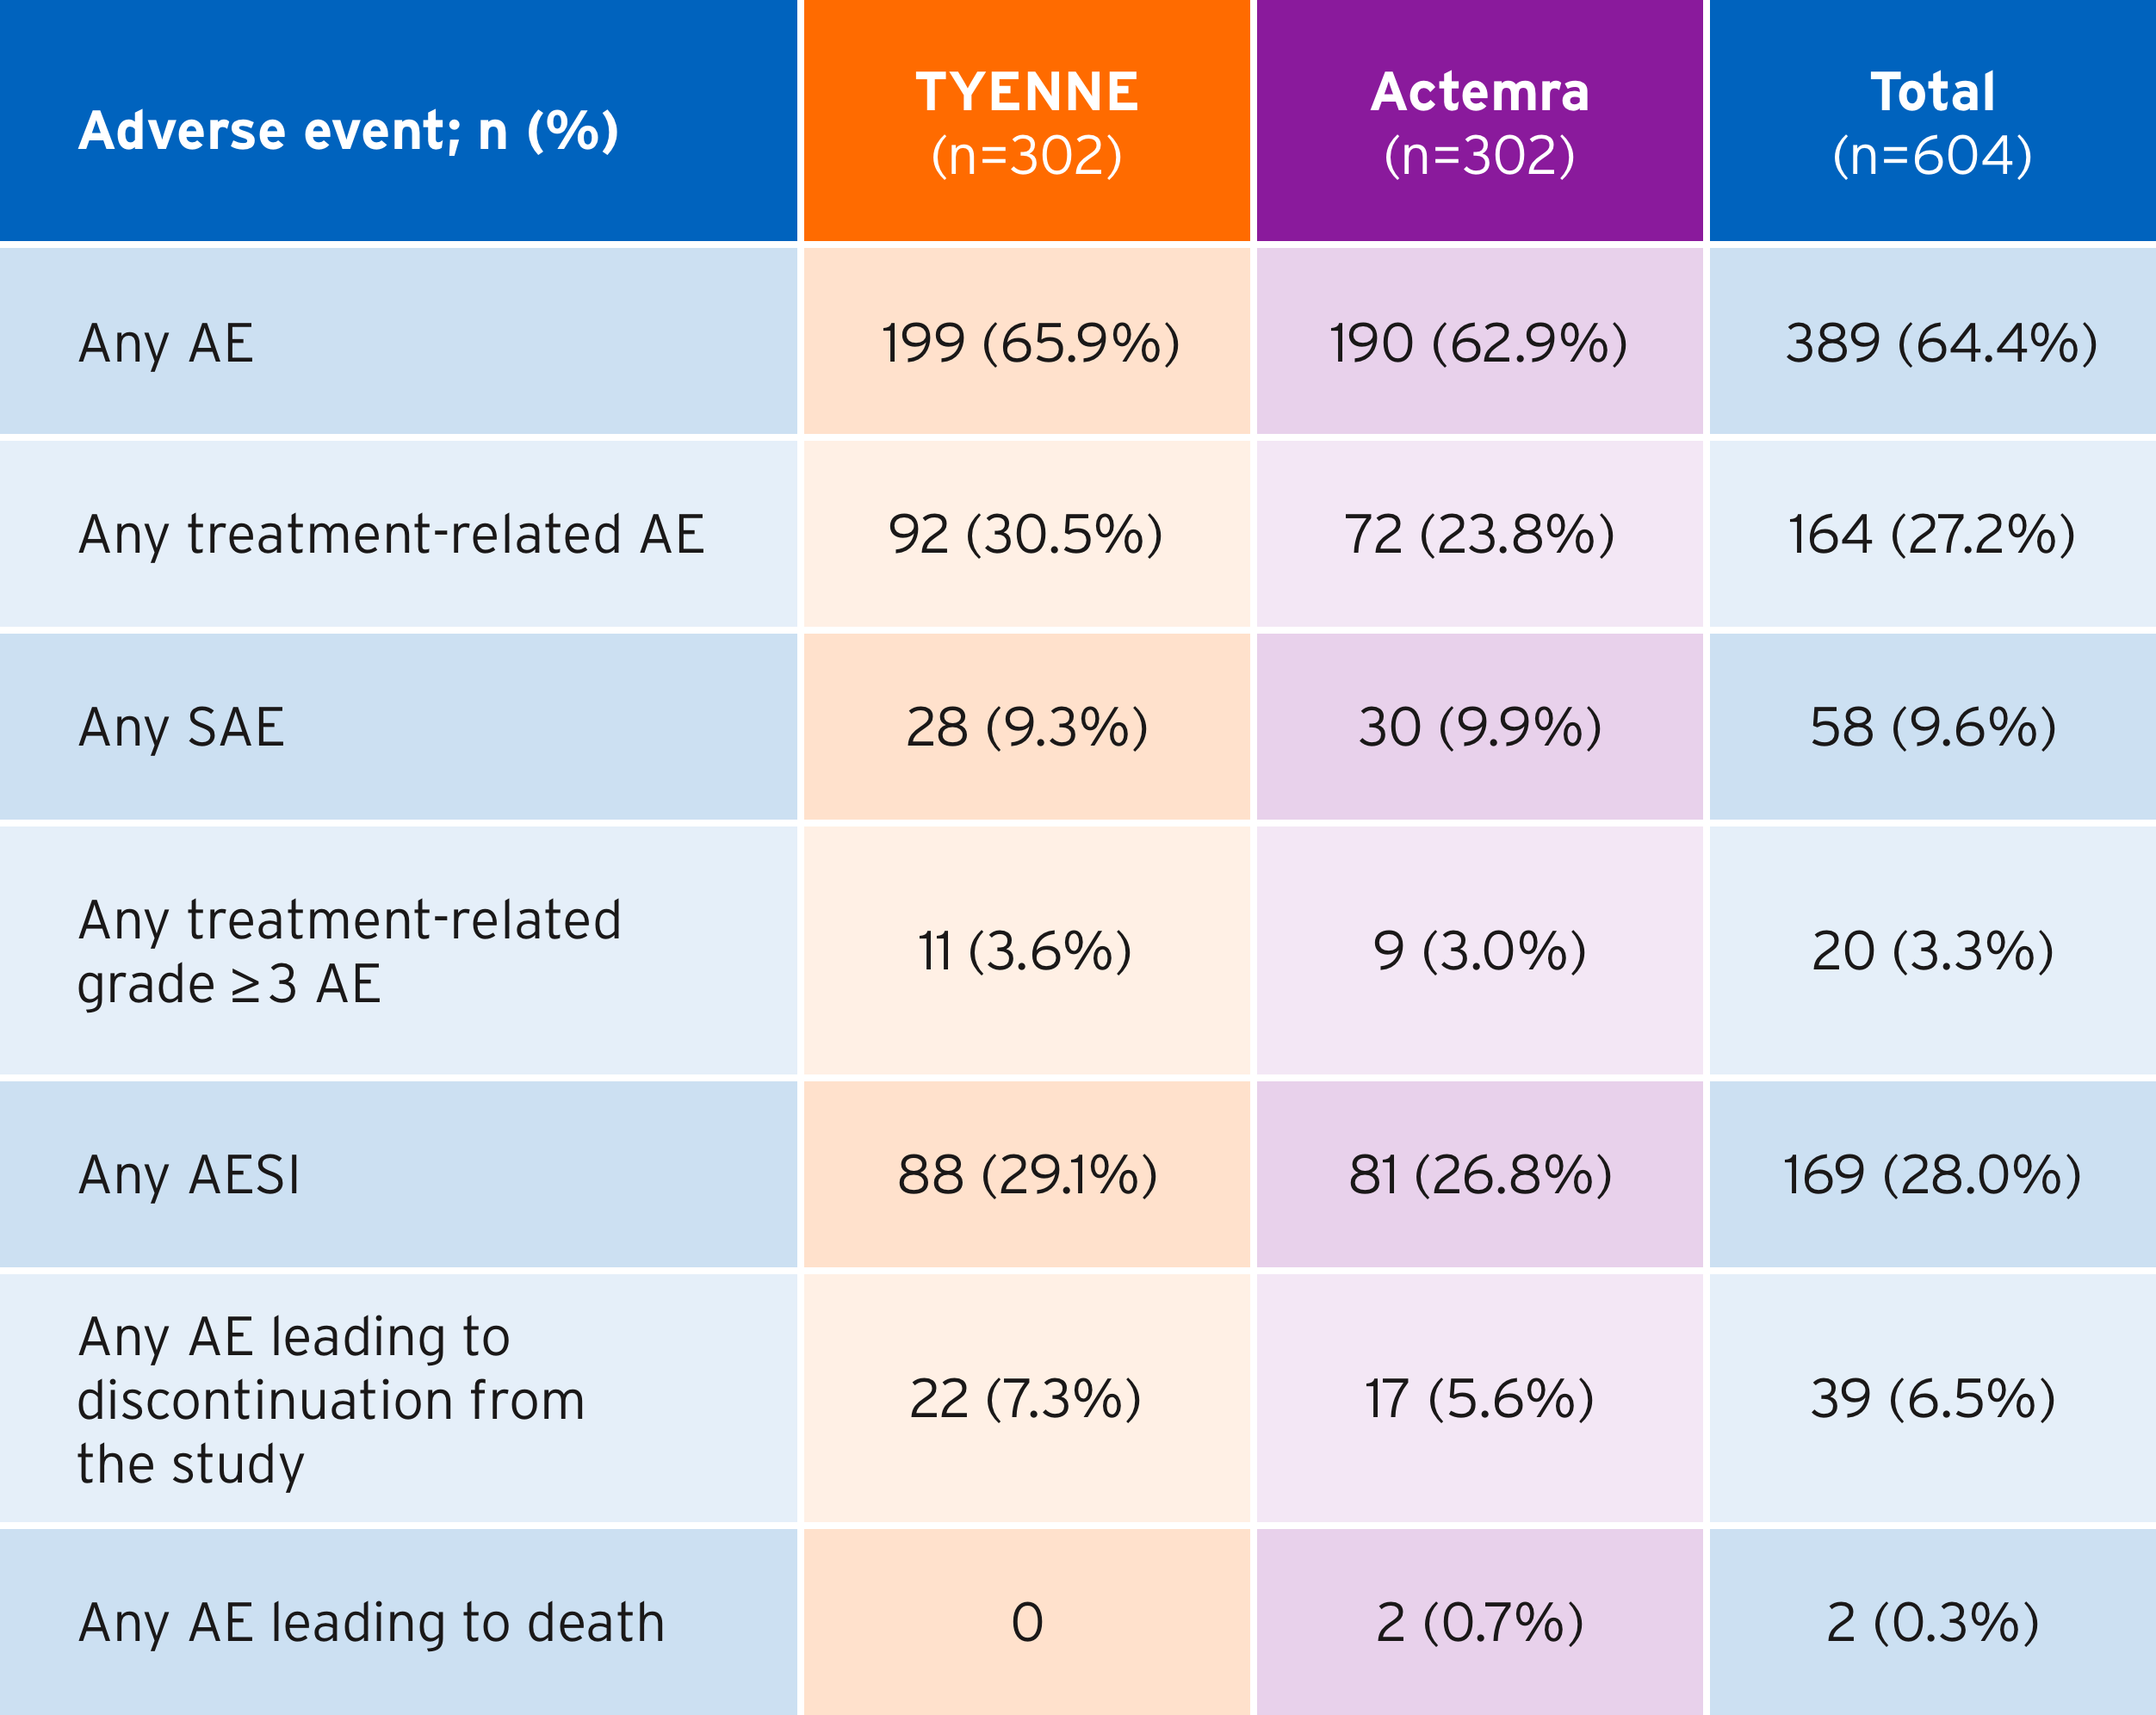 Table depicting comparable safety via adverse events in both TYENNE and Actemra